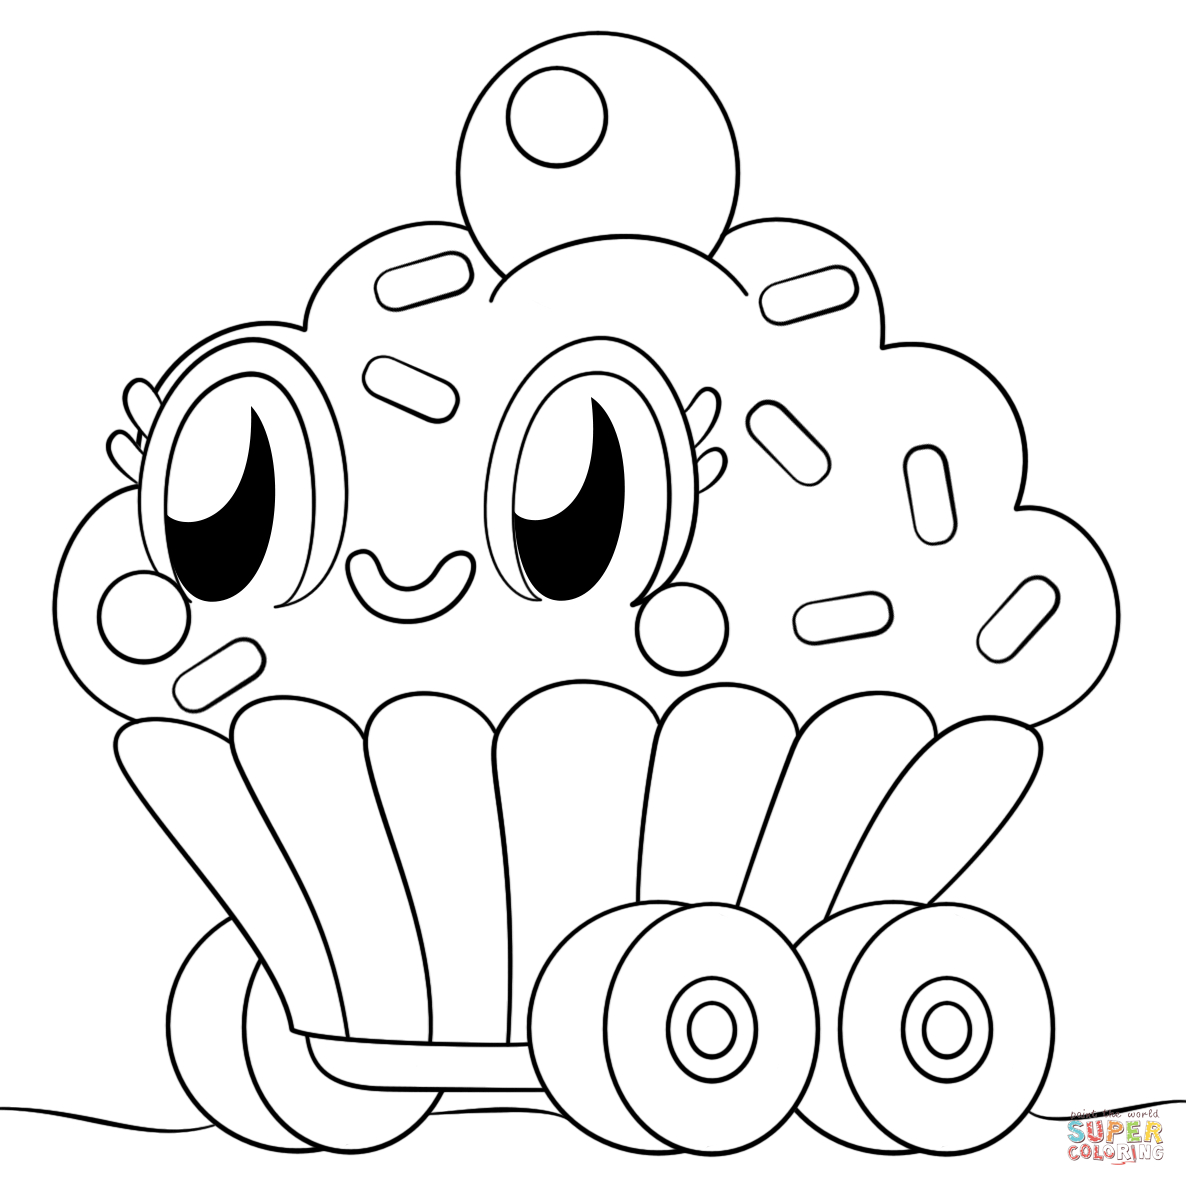 Moshi Monster Coloring Pages Moshi Monsters And Moshlings Coloring Pages Free Coloring Pages